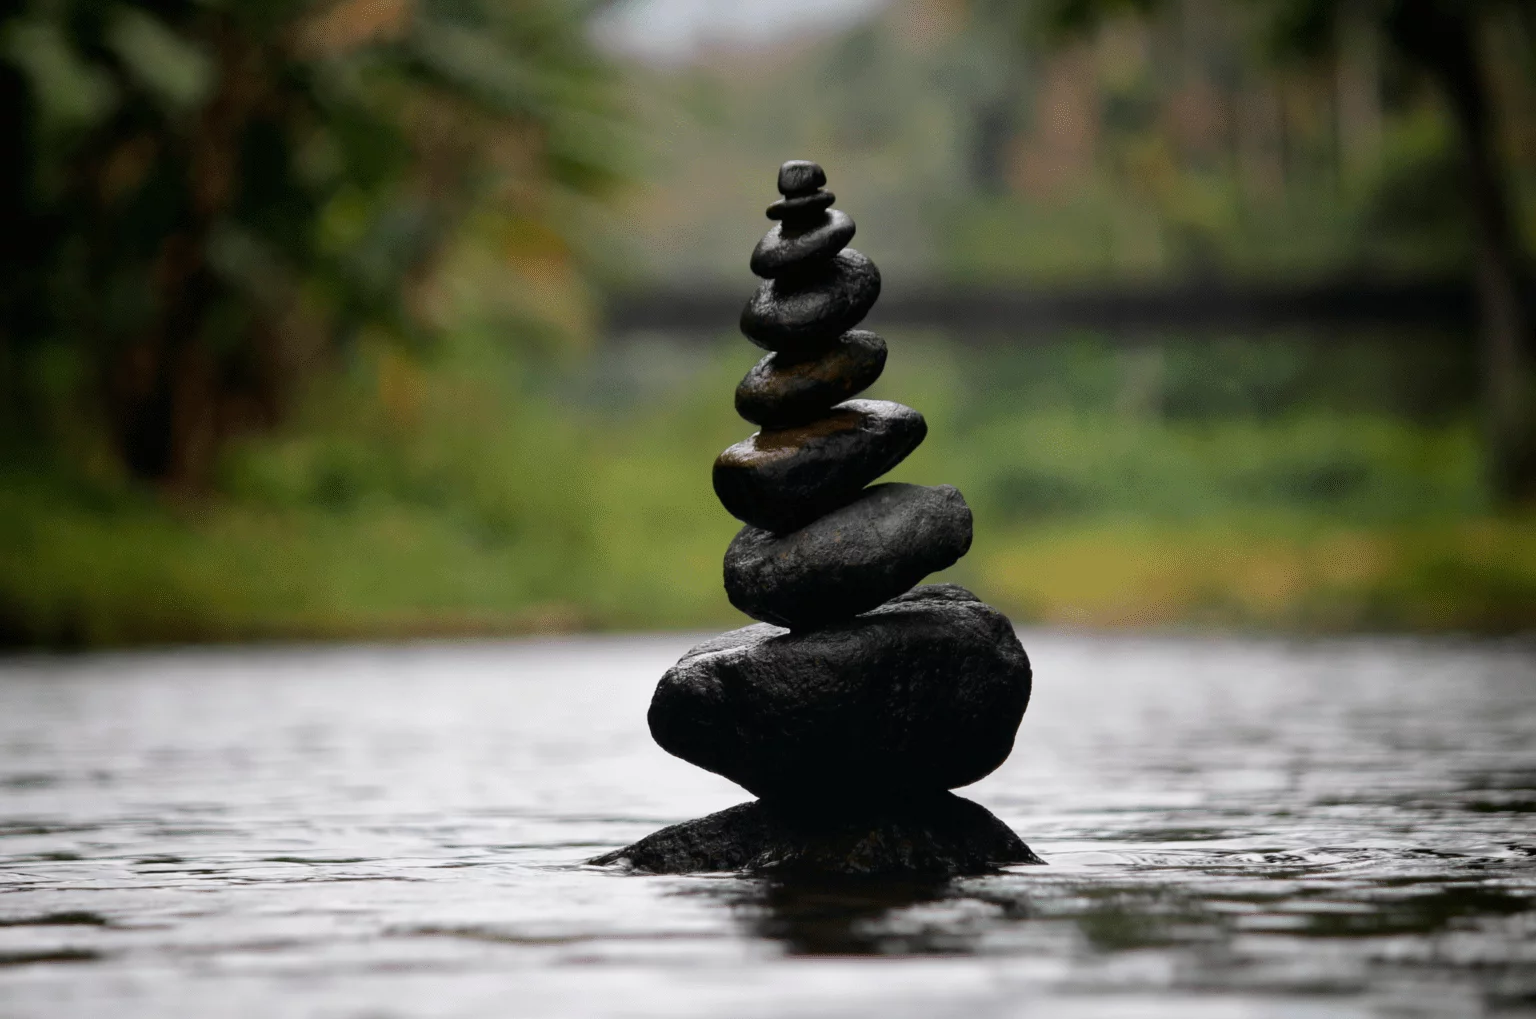 Piled black stone on water in nature zoomed